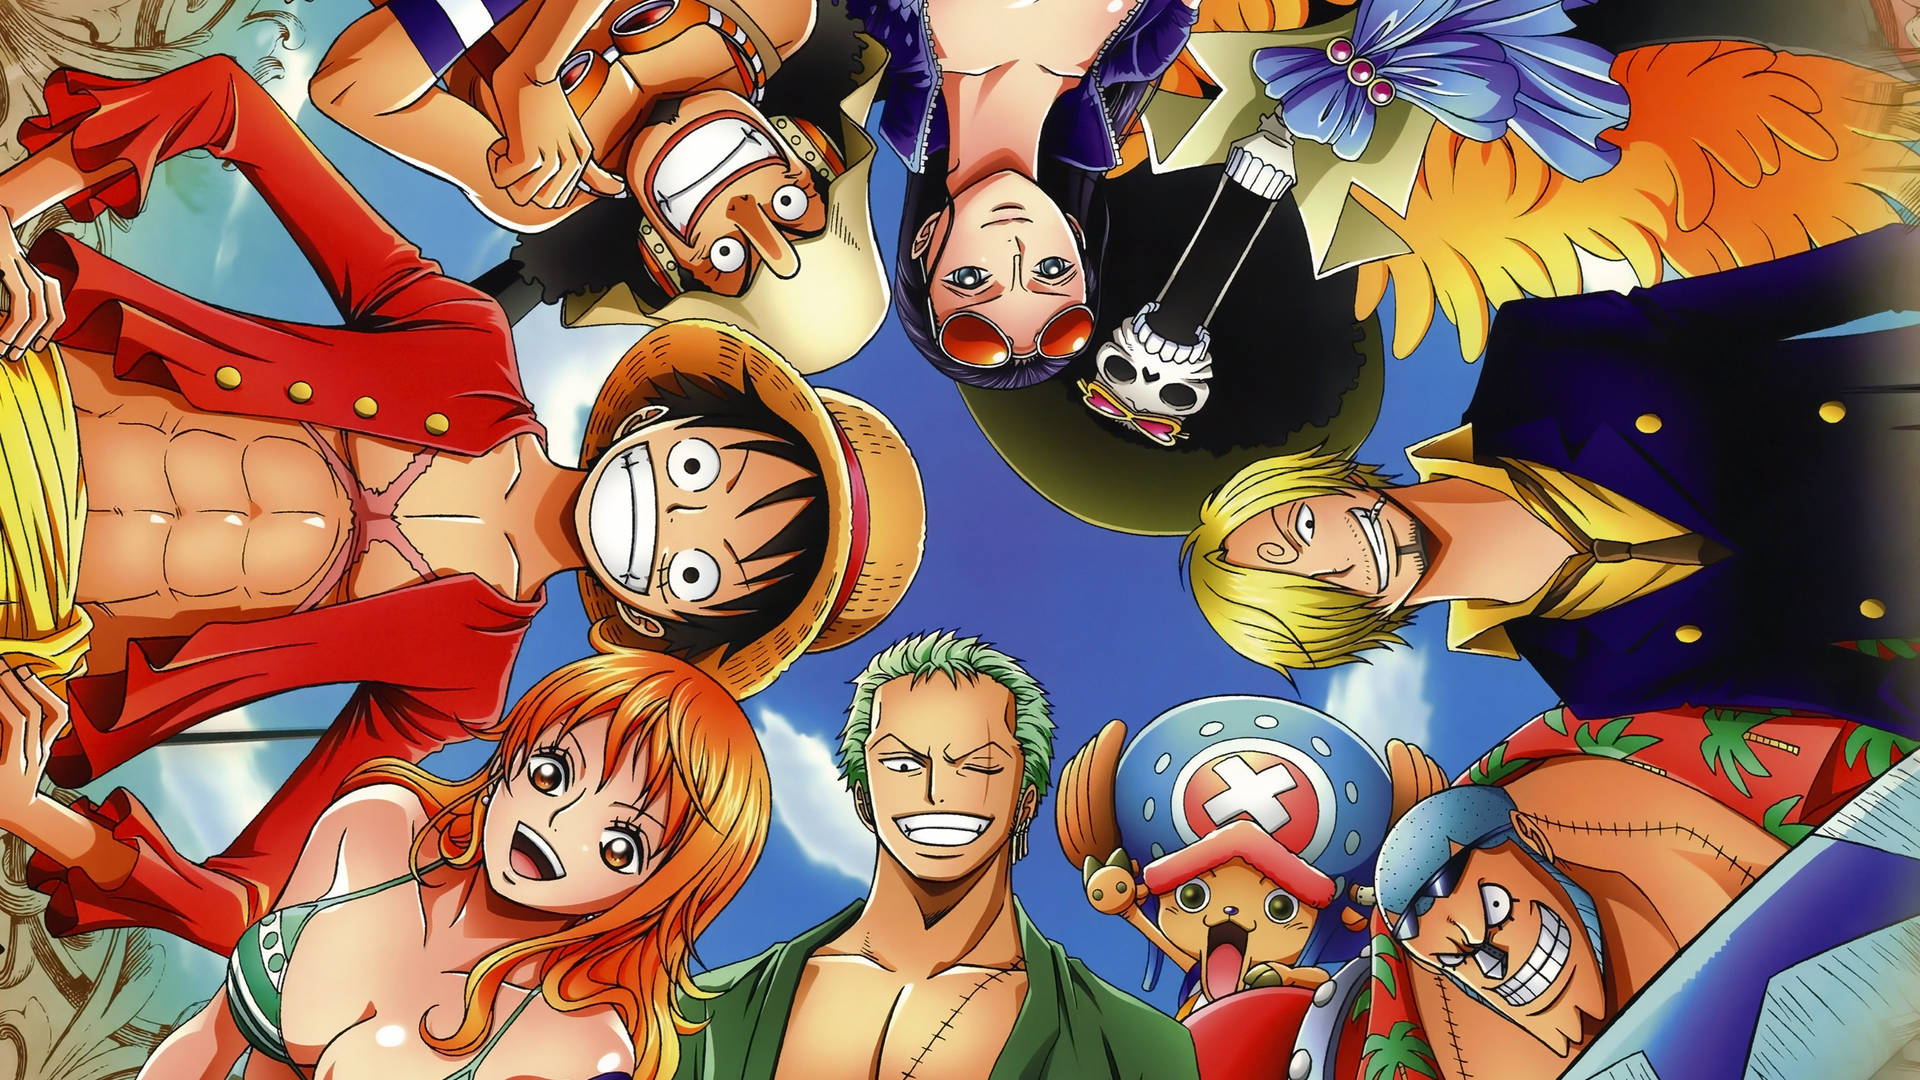 Sanji And The Straw Hat Pirates Set Sail On Their Journey!